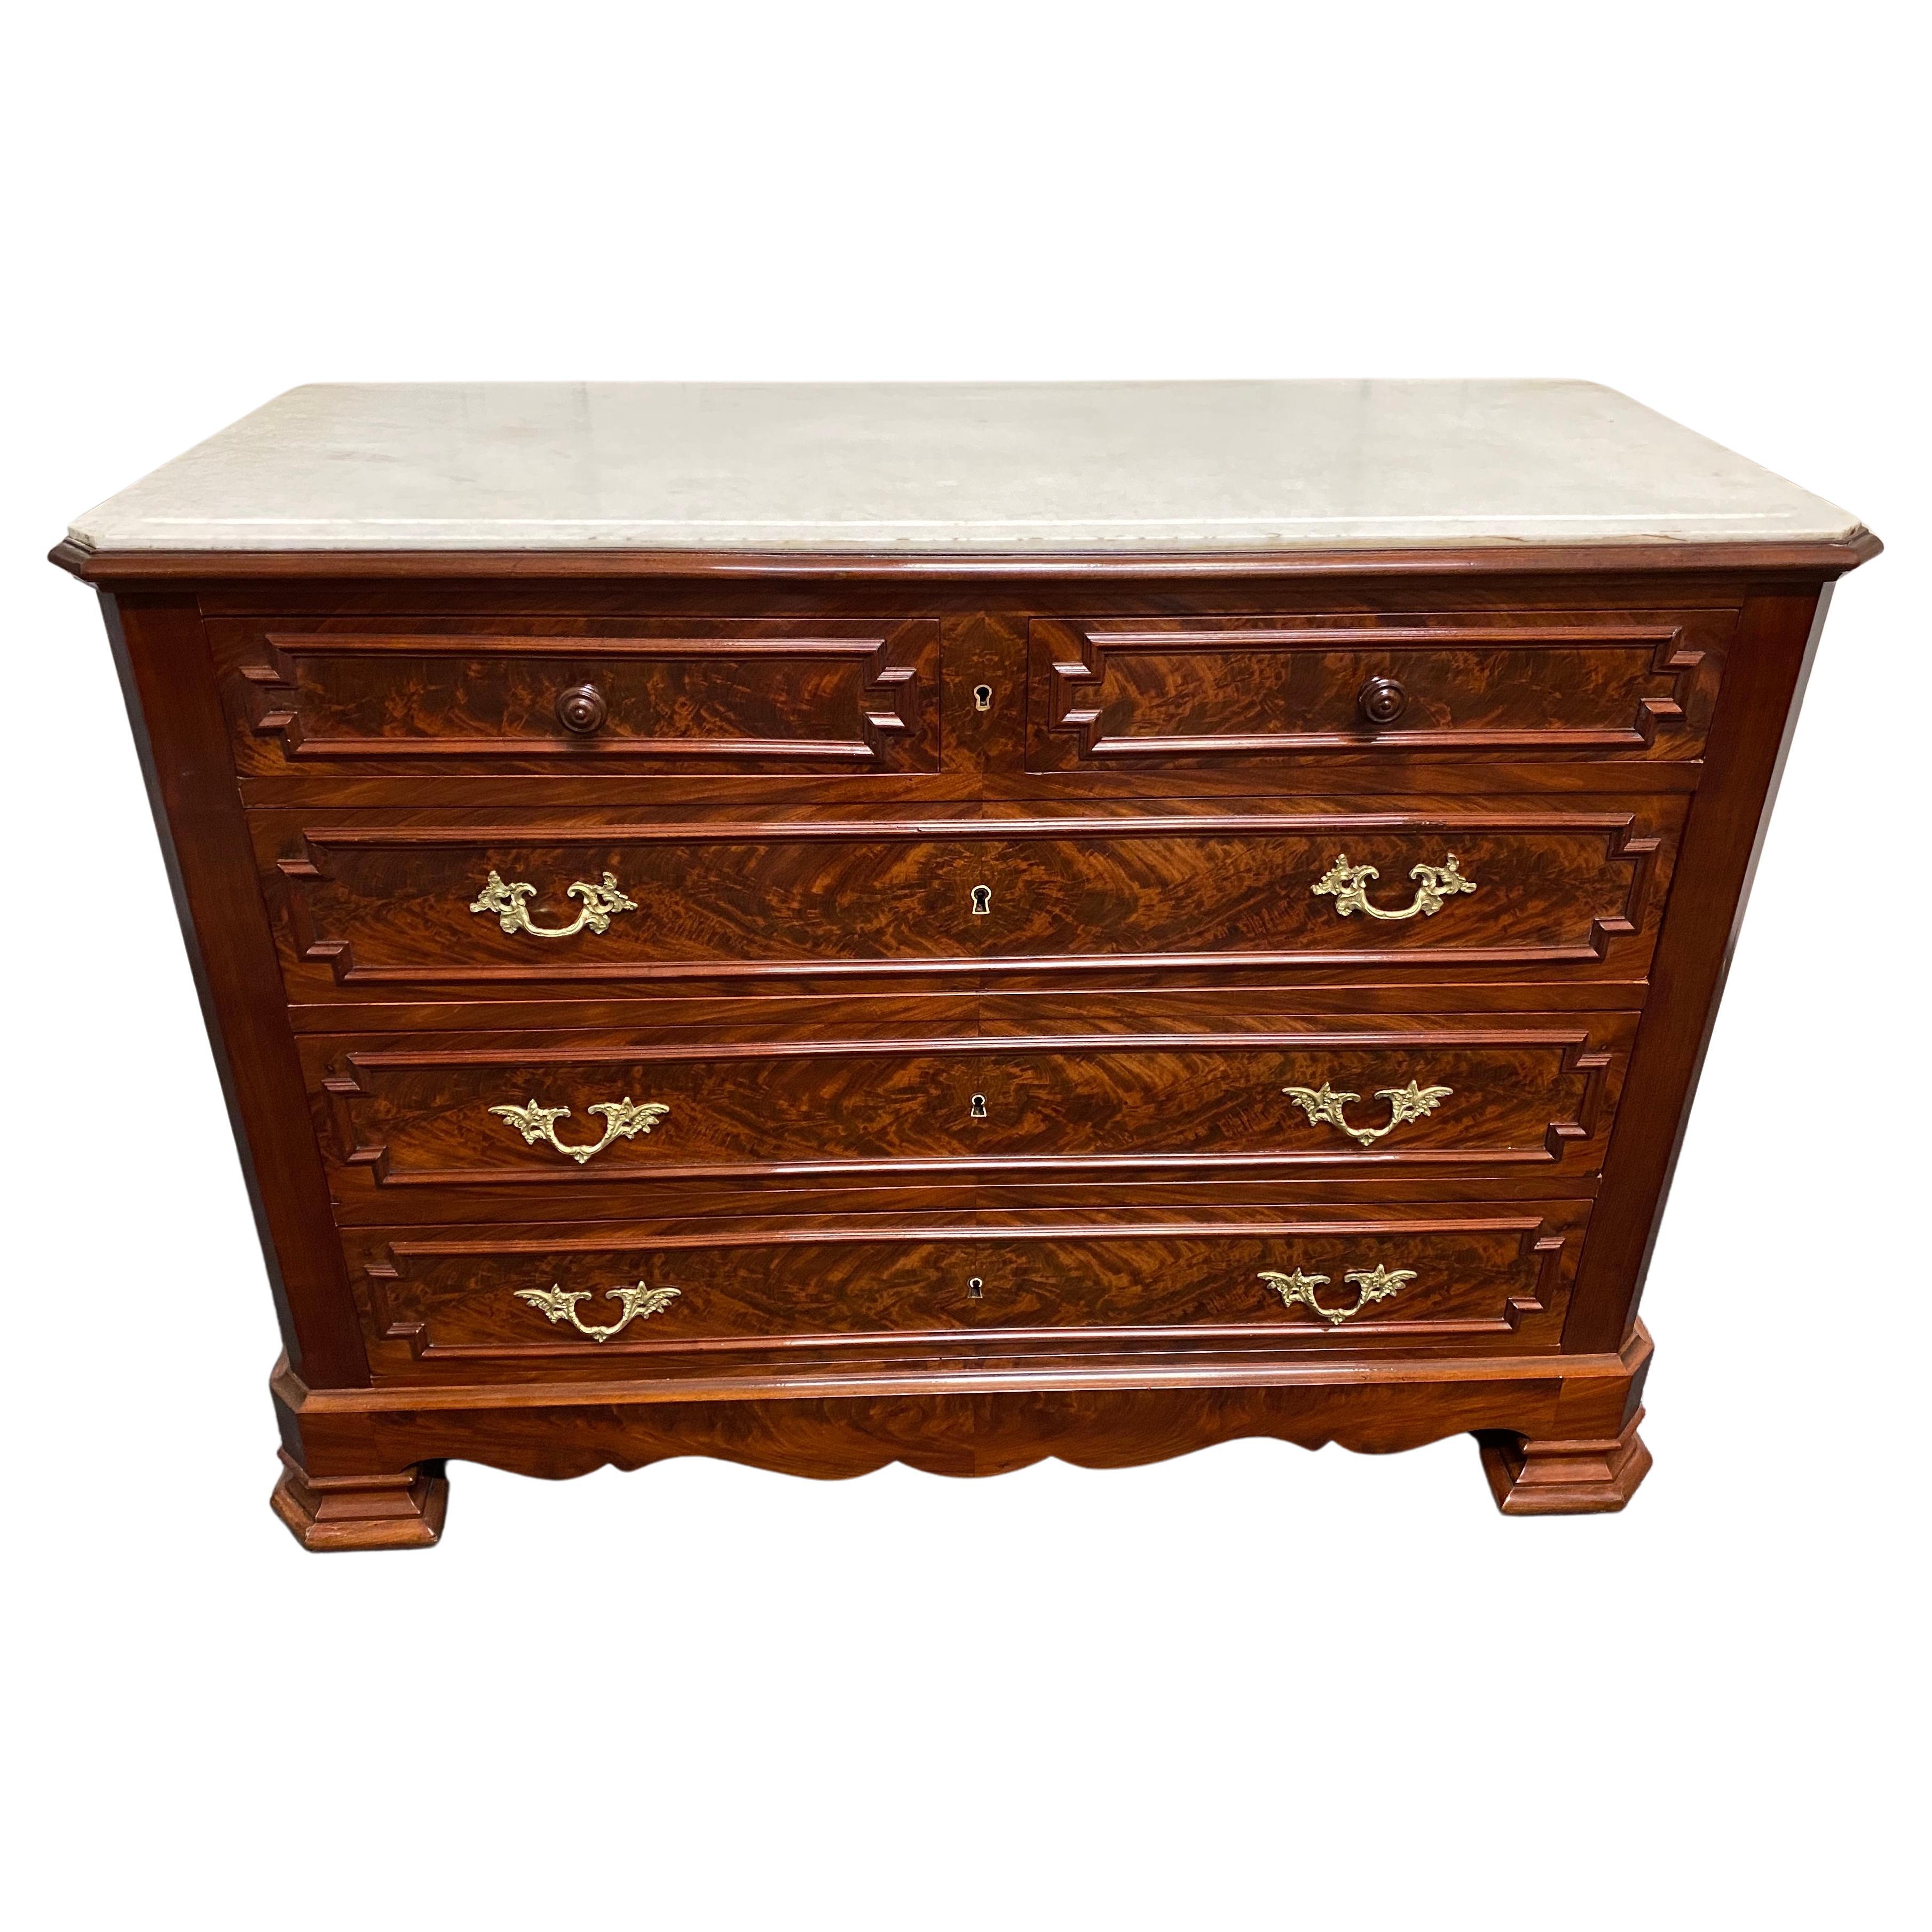 Good Quality French Marble Top Commode Chest of Drawers For Sale